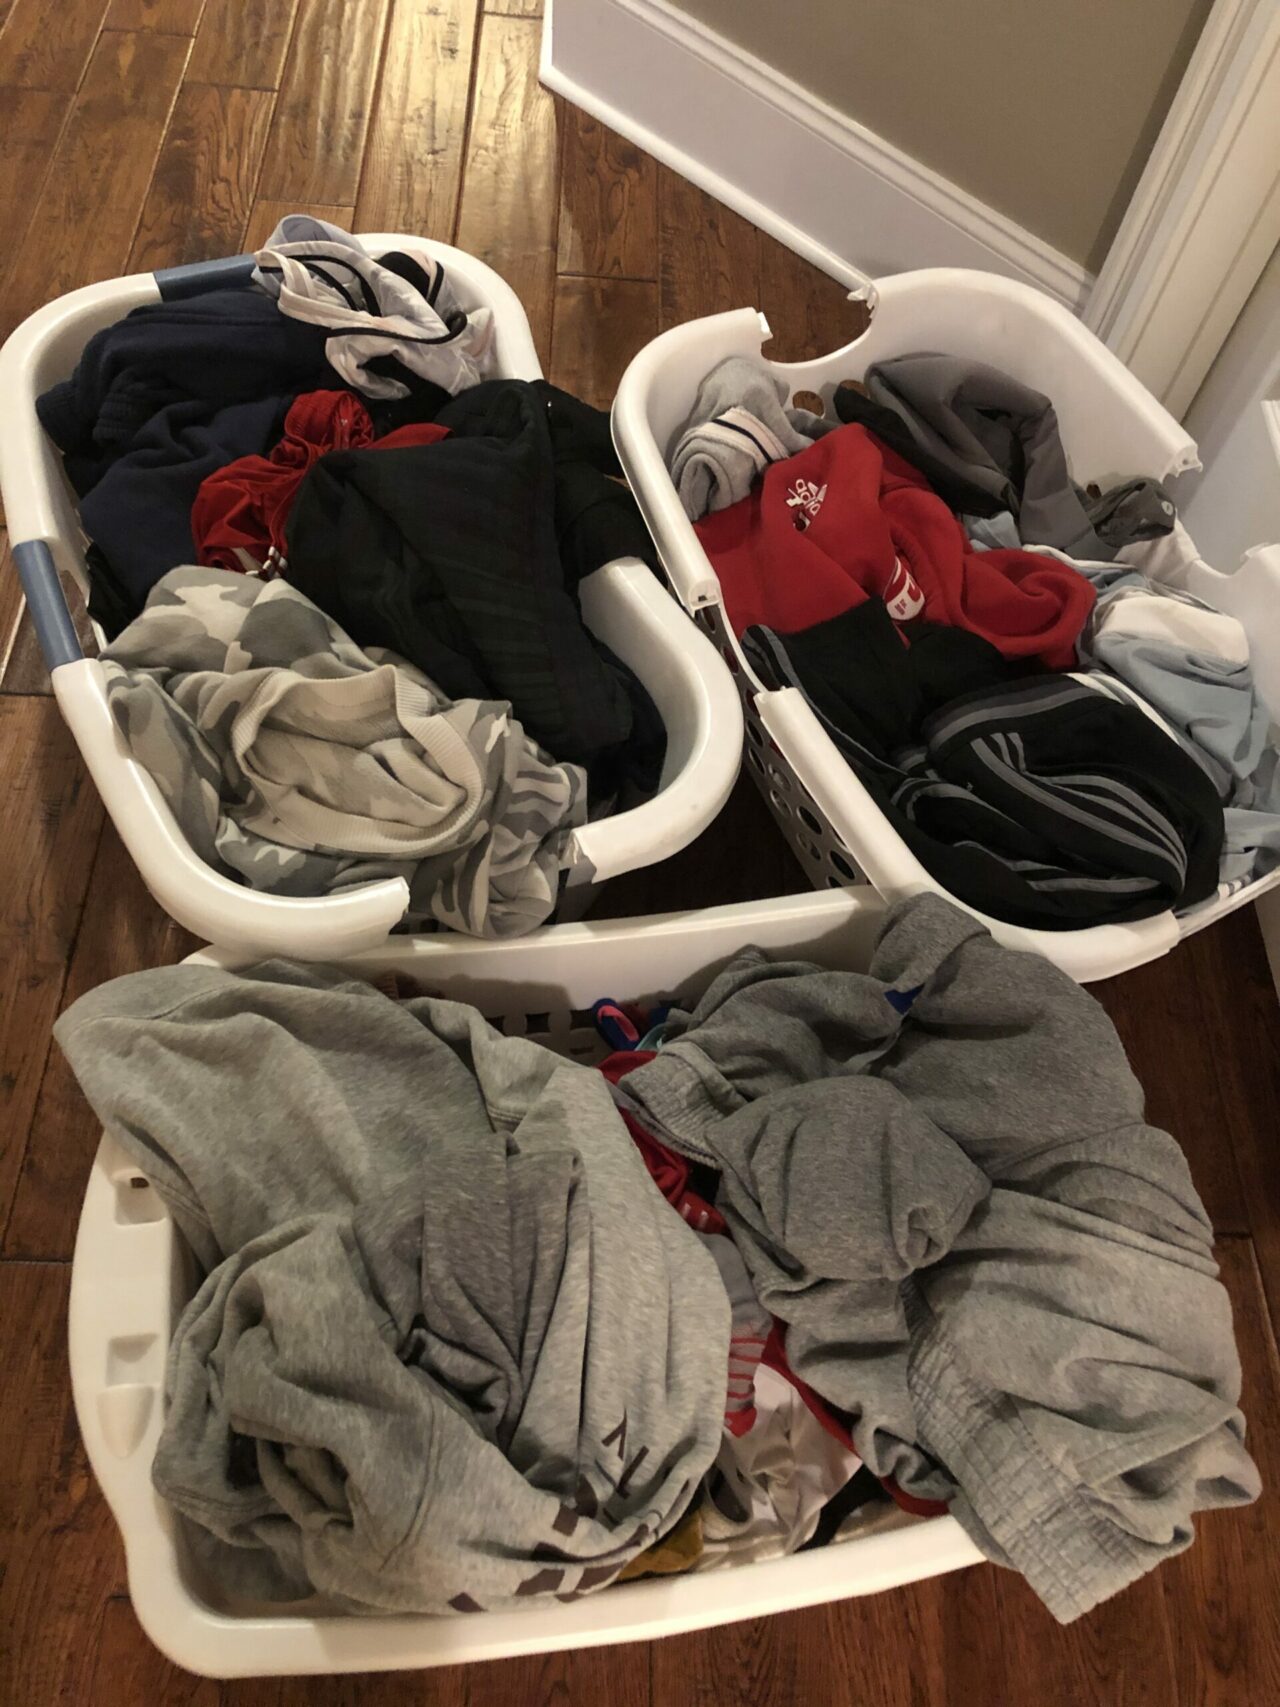 The Basket of Laundry That Led To Therapy